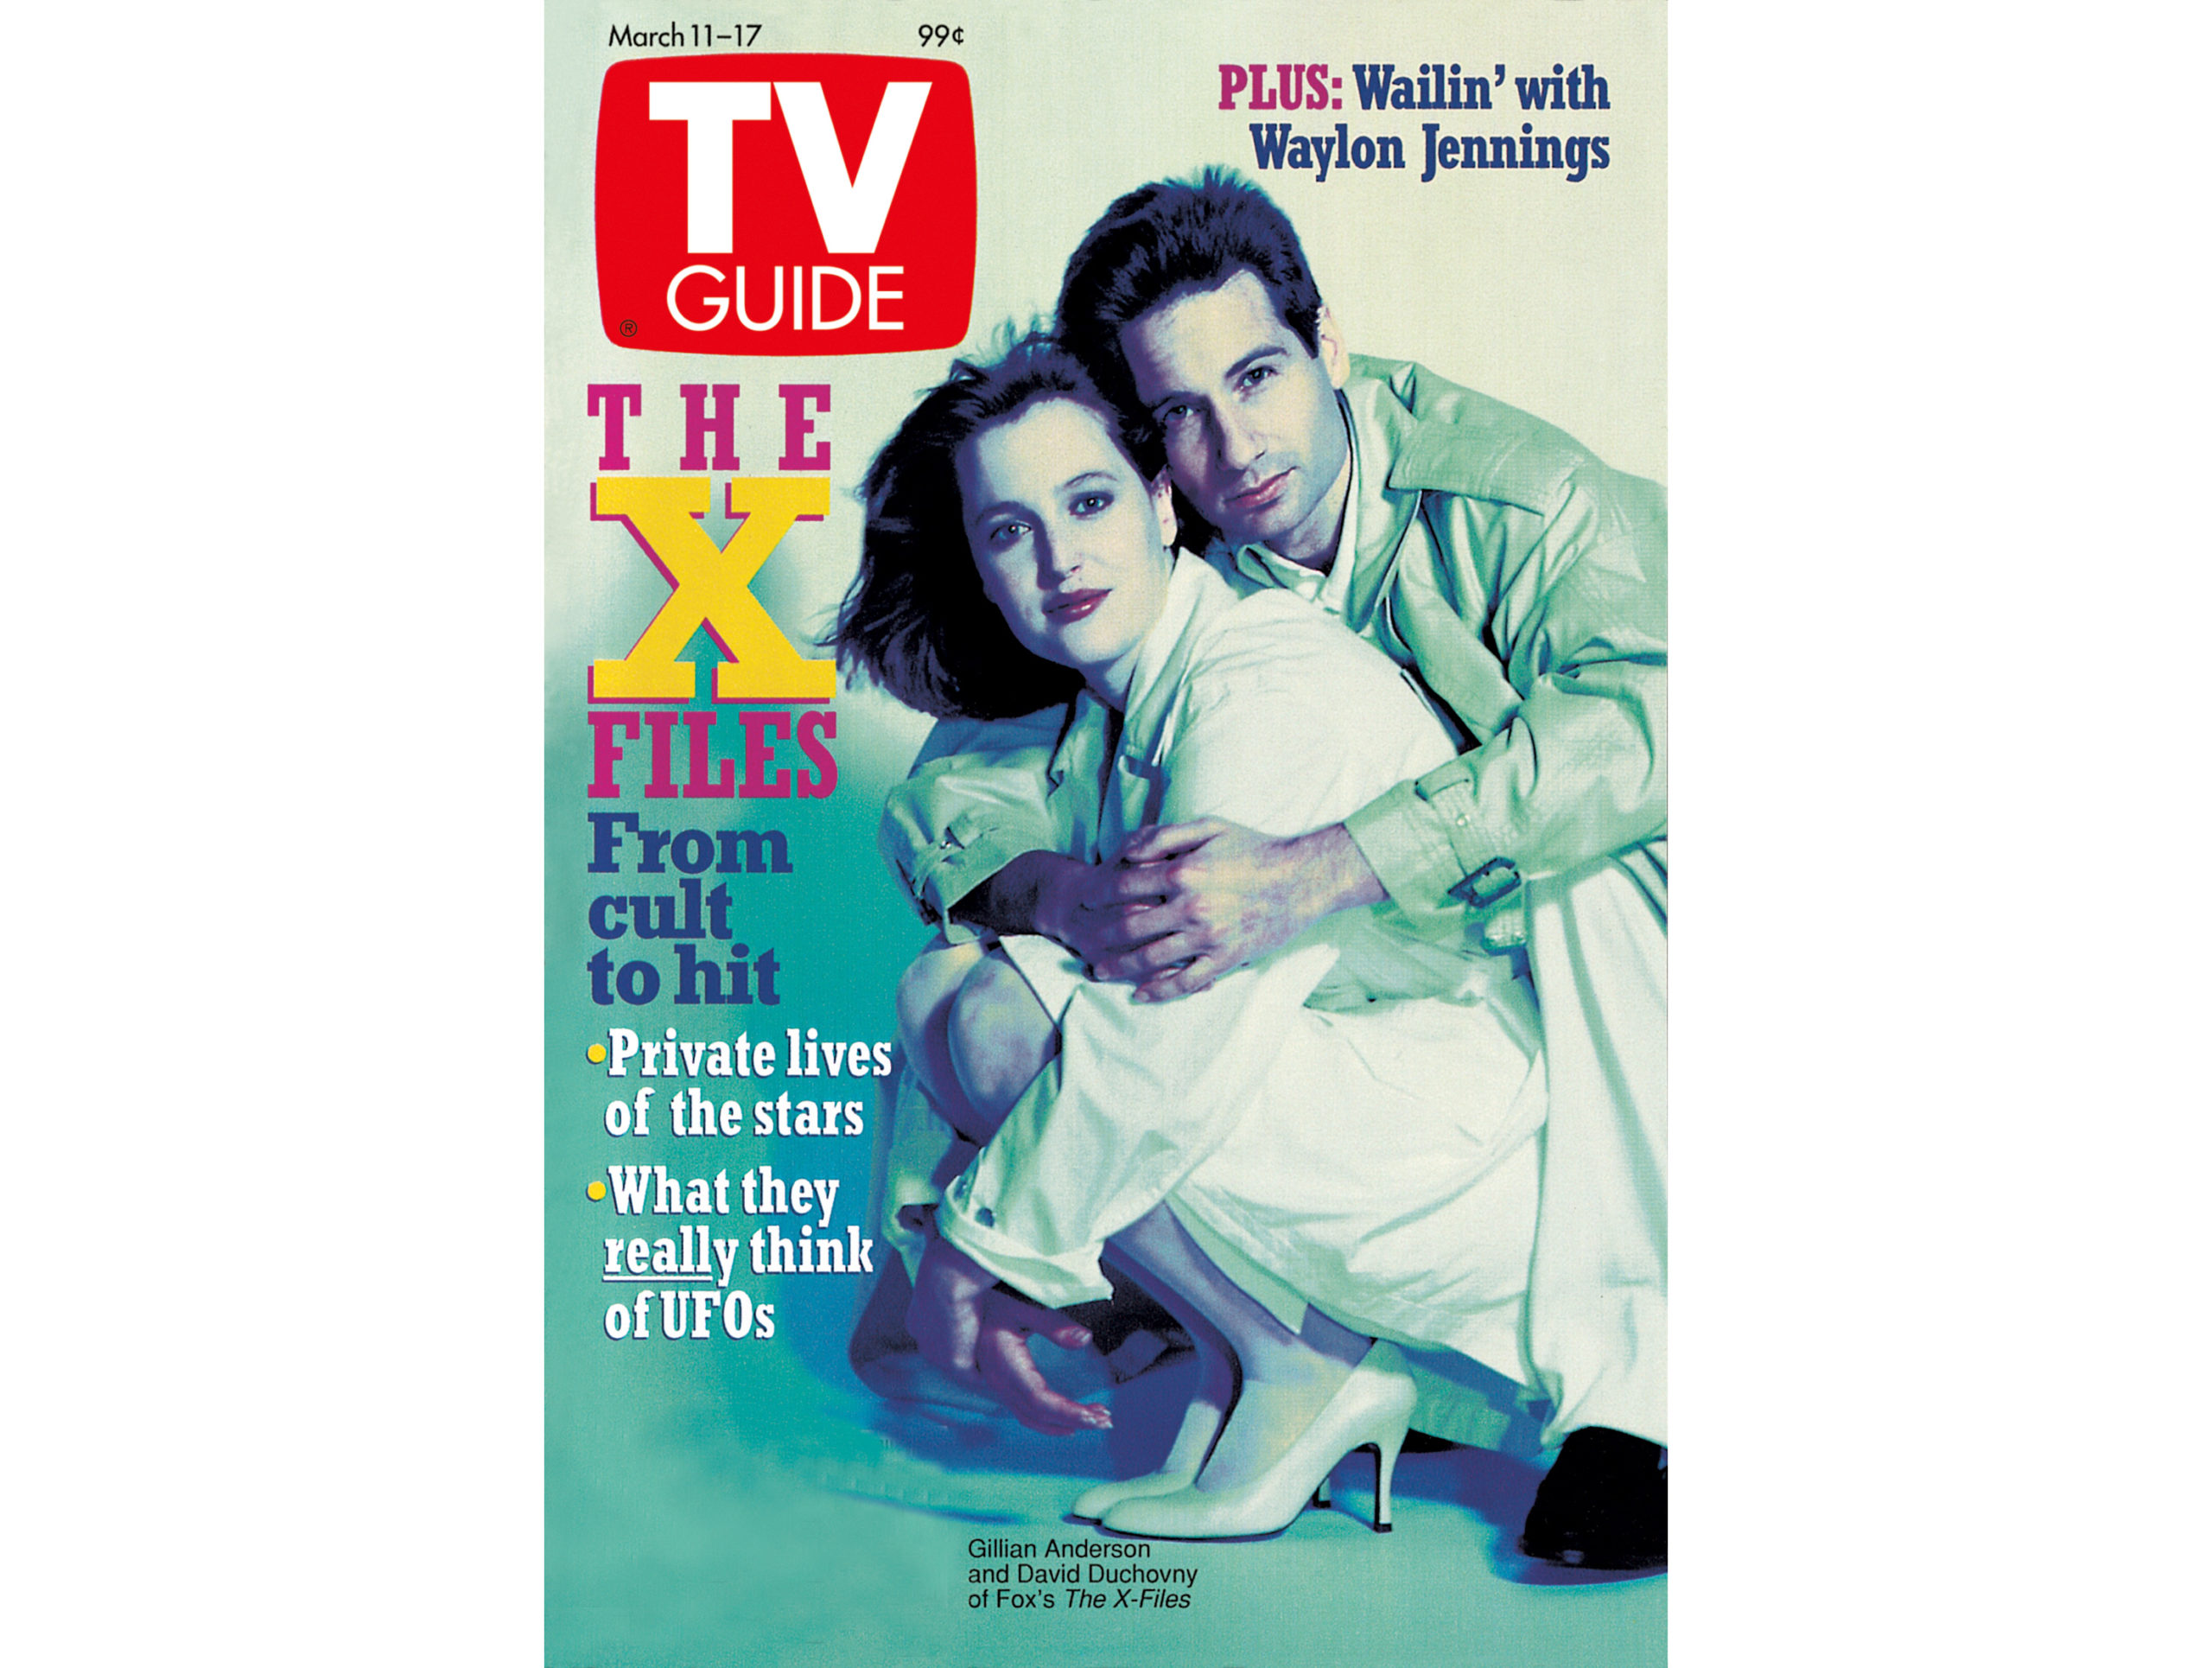 The X-Files on the cover of TV Guide Magazine in March 1995 - Gillian Anderson and David Duchovny